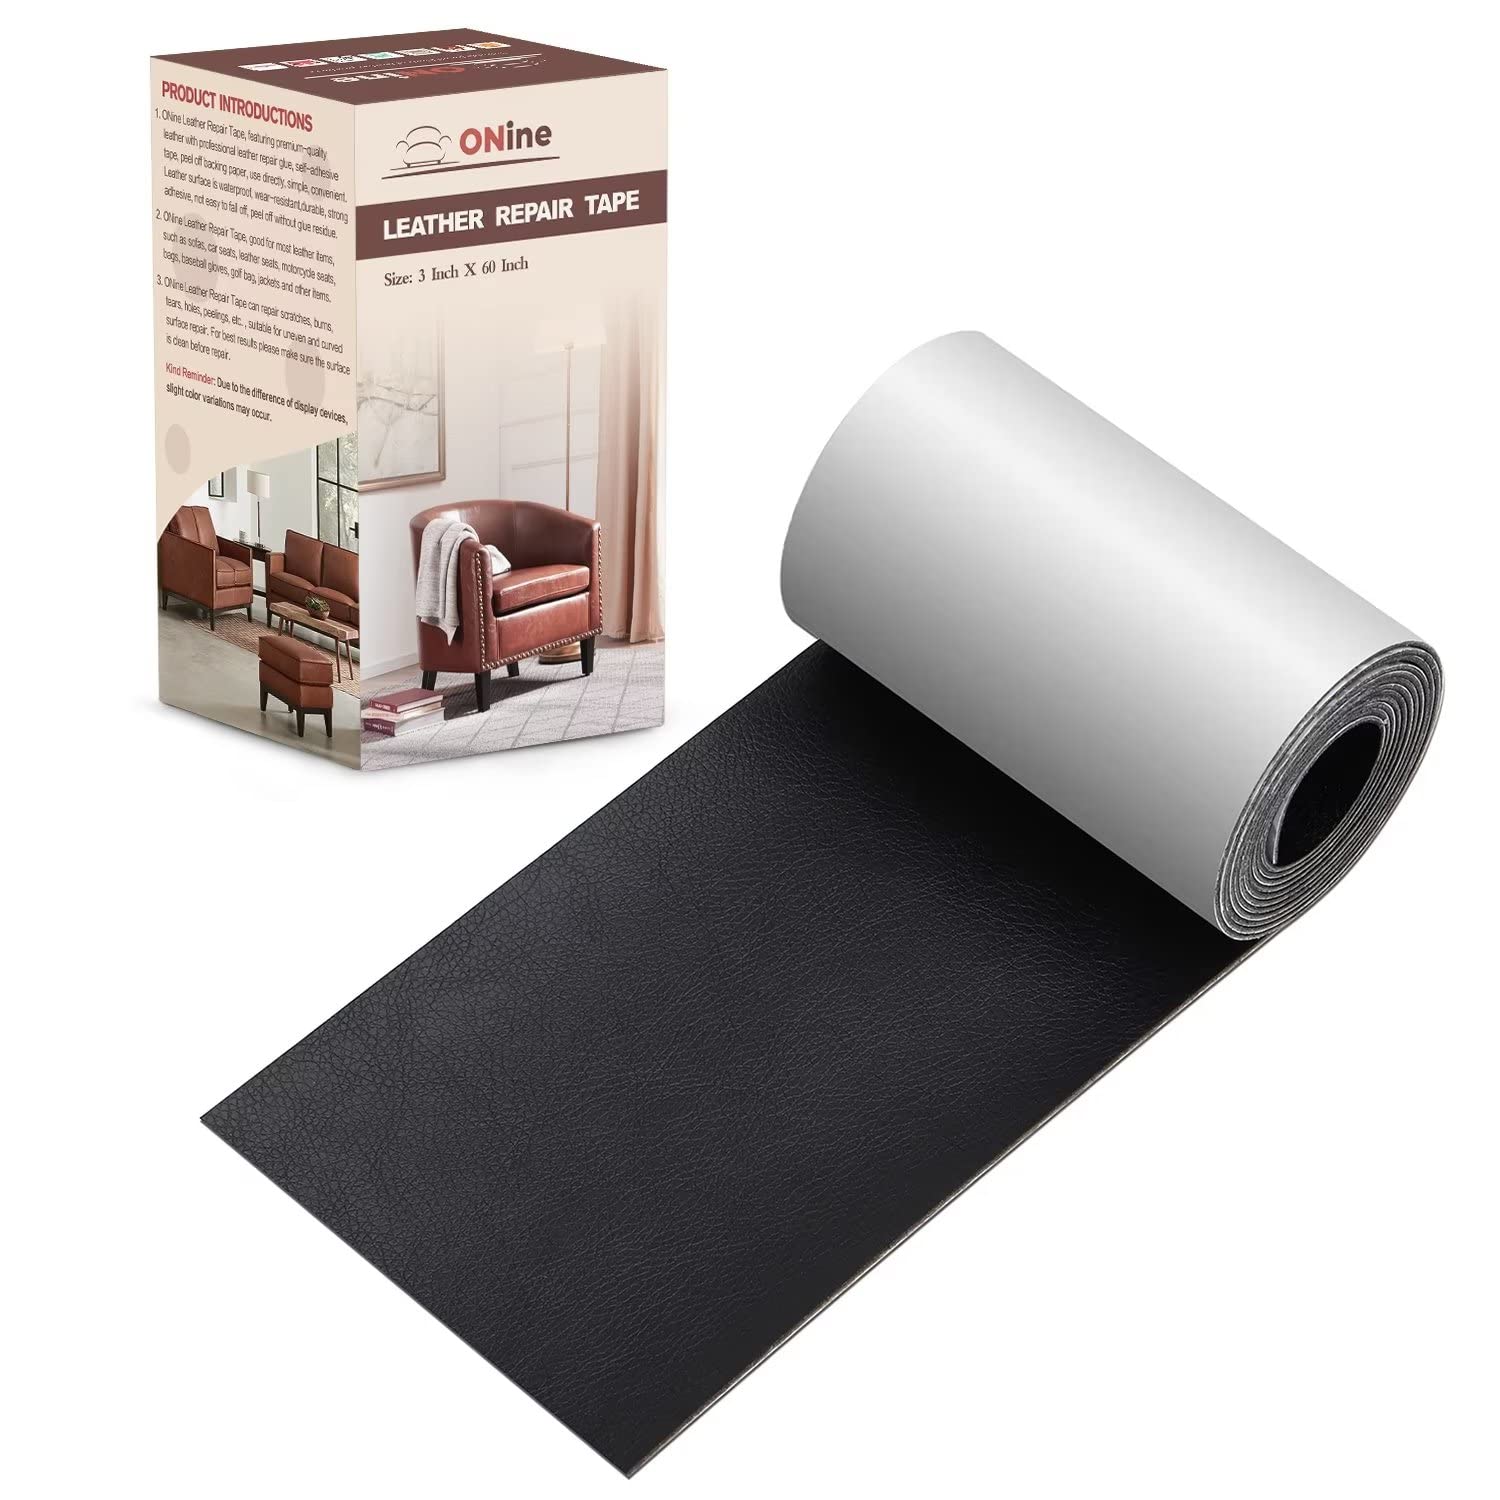 STMGOO Leather Repair Tape, Self-Adhesive Leather Repair Patch Kit for Couches Furniture Drivers Seat Sofas Car SEATS Brown 4x79